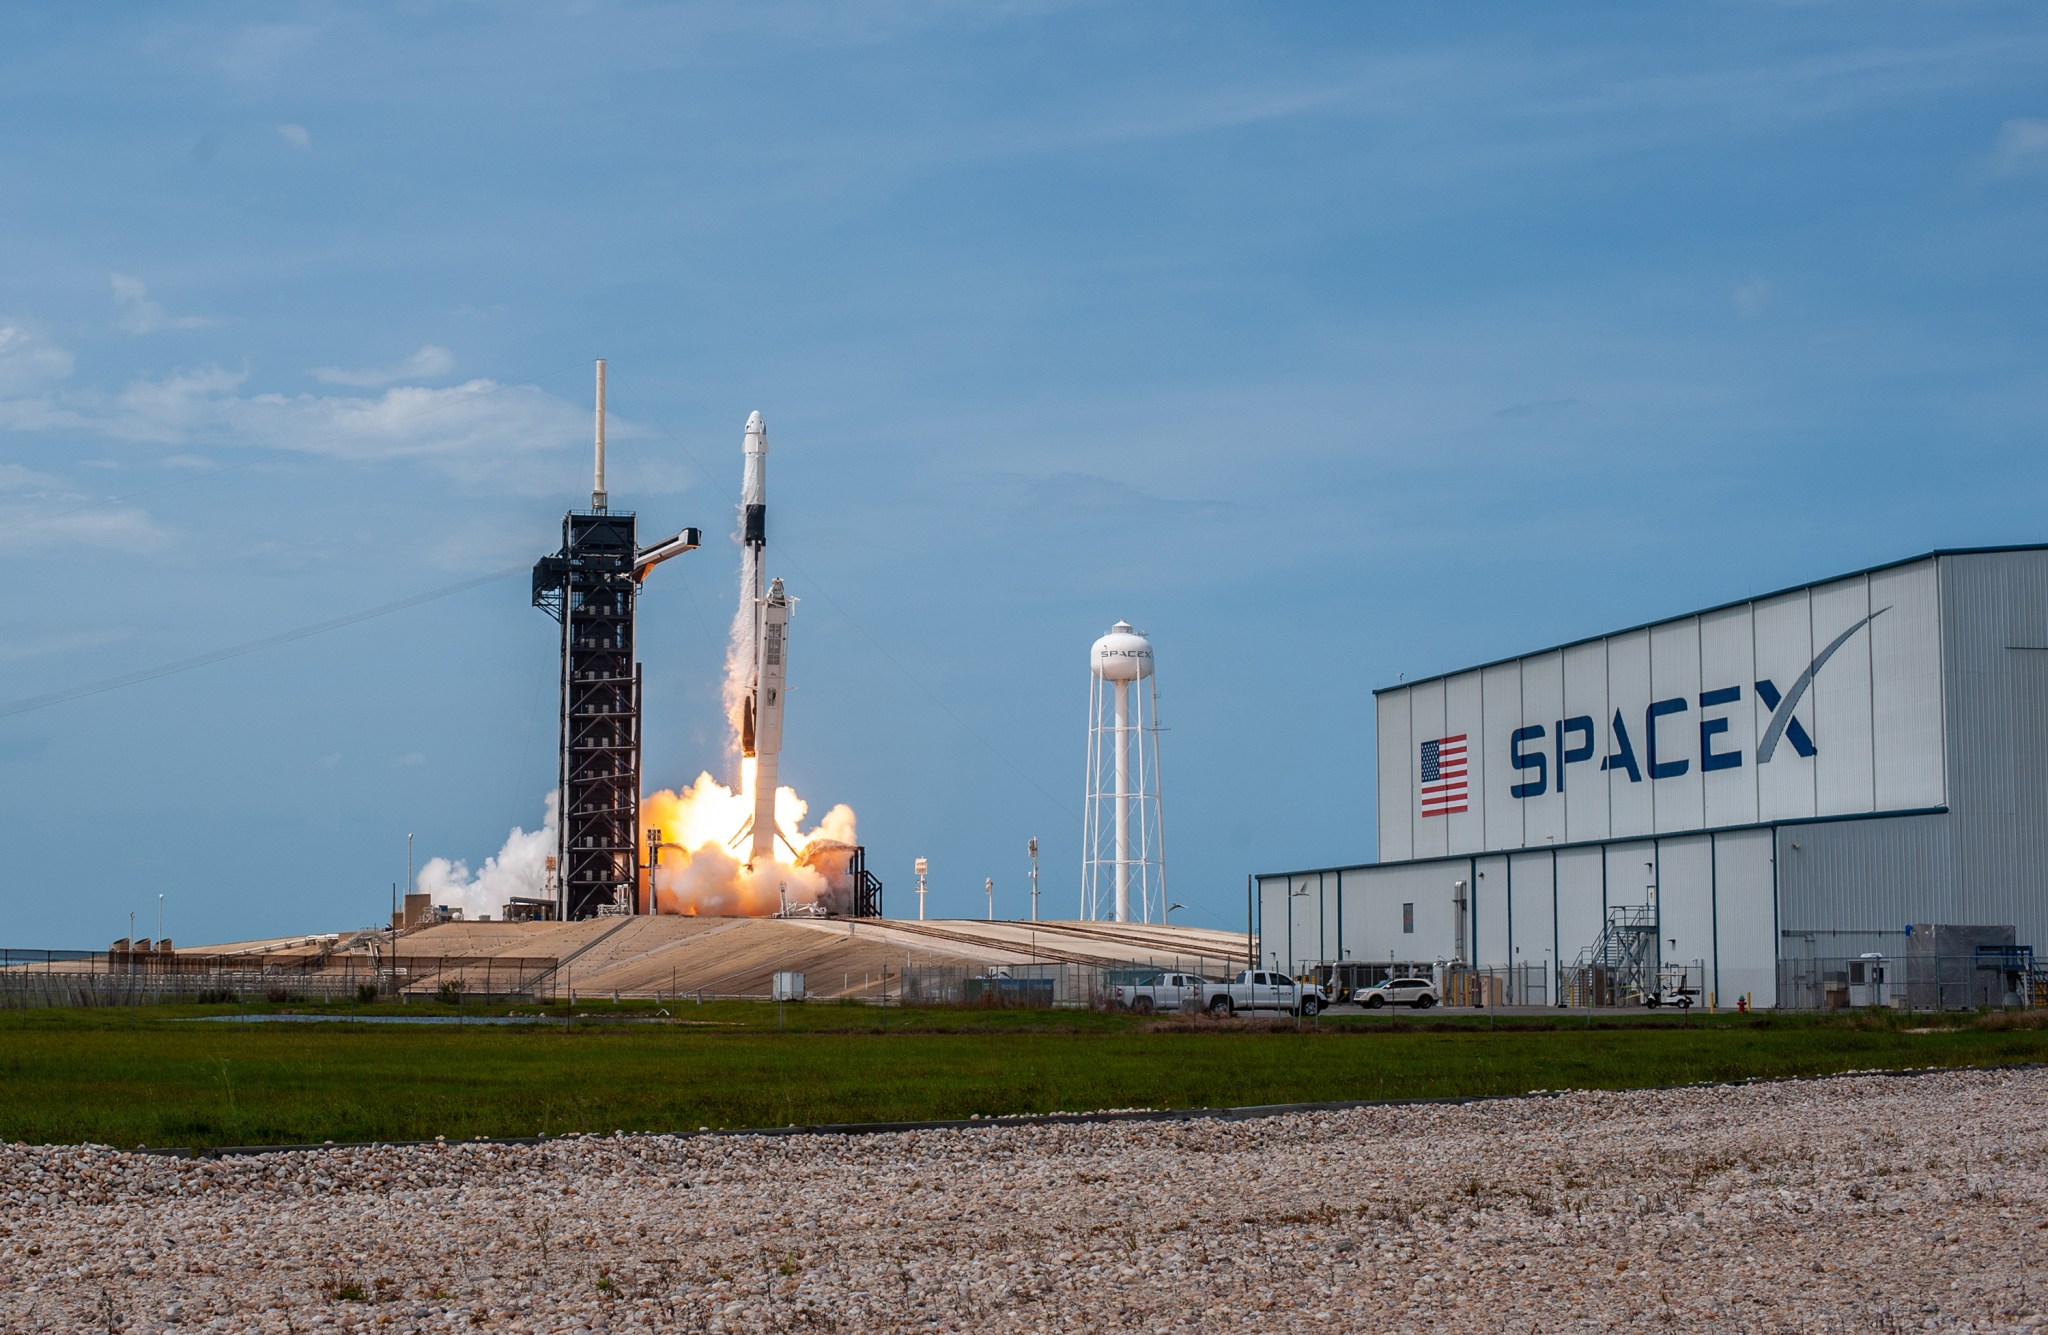 The SpaceX Falcon 9 rocket, carrying NASA astronauts Bob Behnken and Doug Hurley inside the Crew Dragon spacecraft, lifts off for the company's Demo-2 mission to the International Space Station.